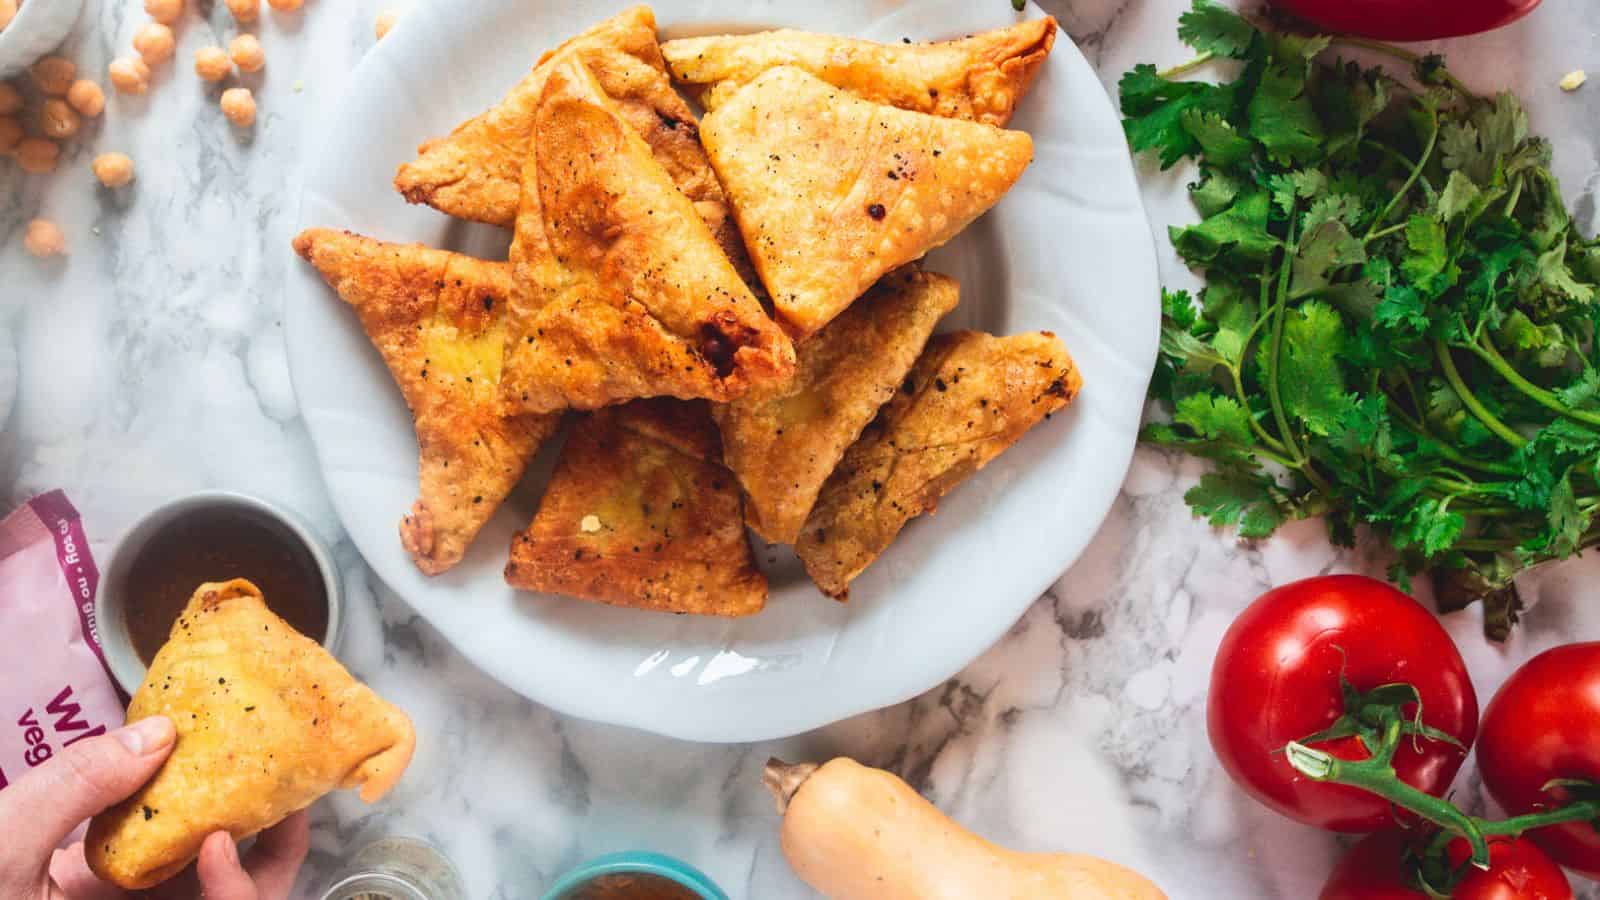 A plate with a plate of vegetables and a plate of samosas.